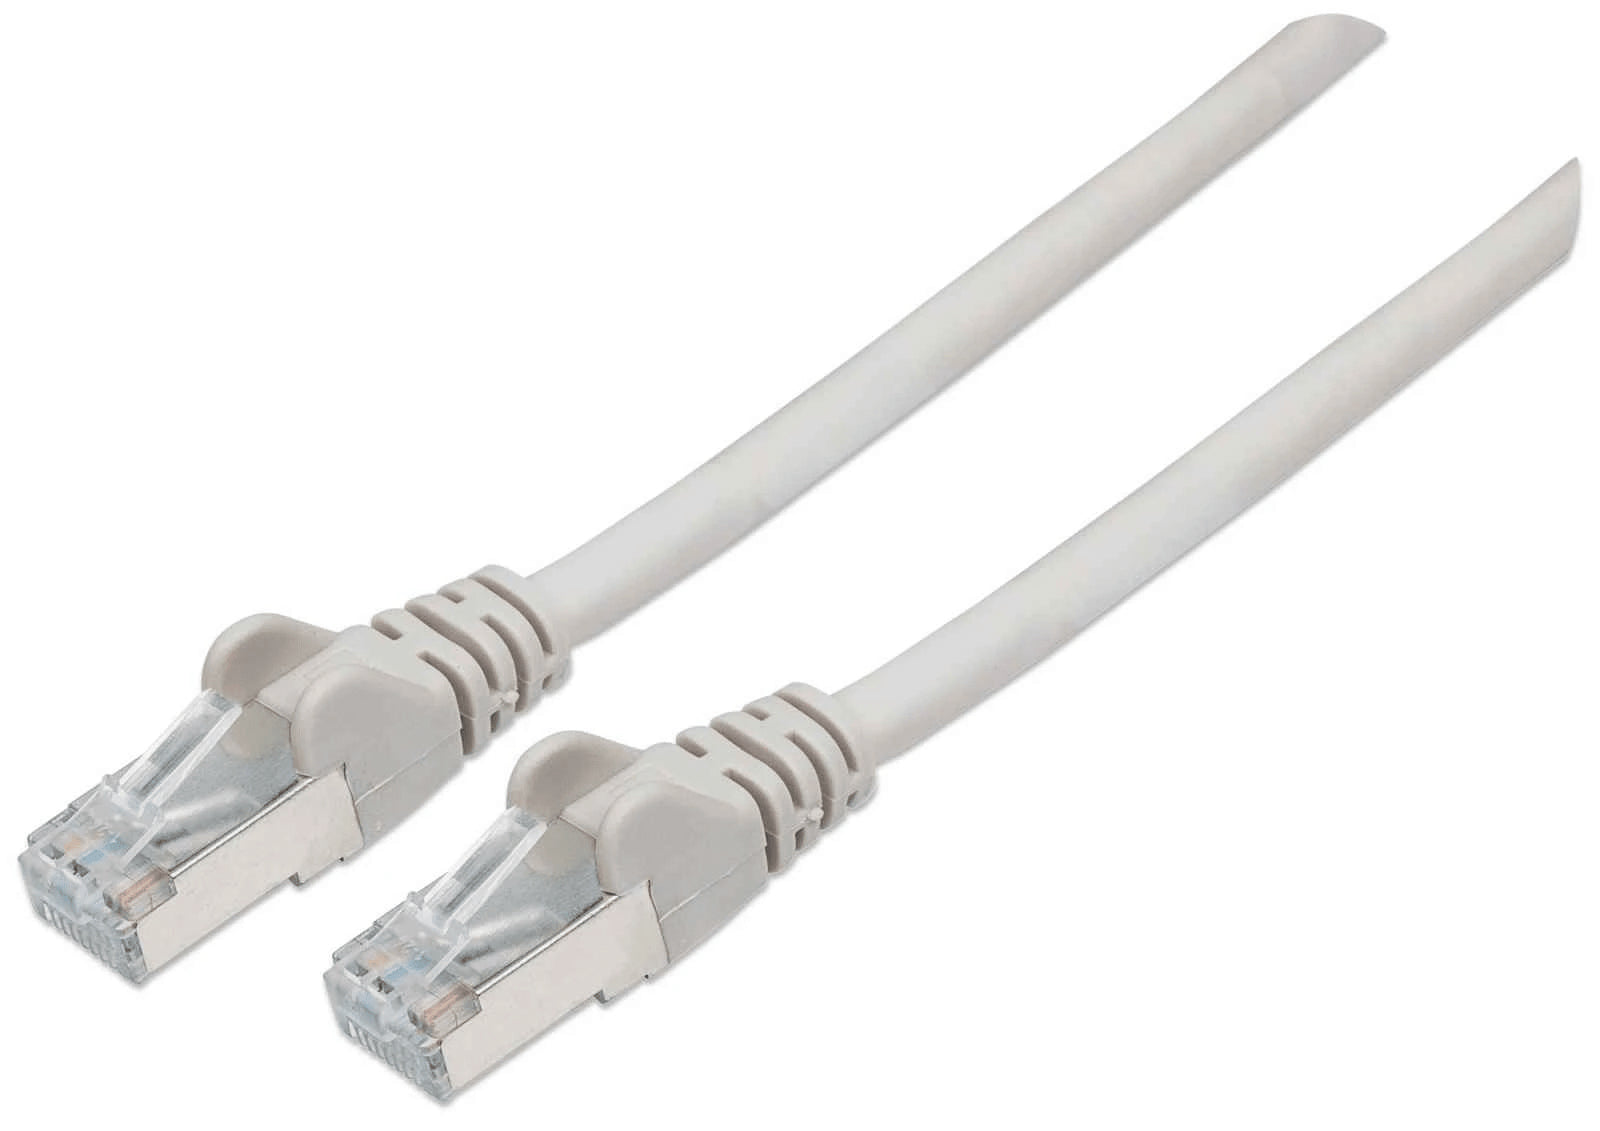 Intellinet Network Patch Cable, Cat7 Cable/Cat6A Plugs, 2m, Grey, Copper, S/FTP, LSOH / LSZH, PVC, RJ45, Gold Plated Contacts, Snagless, Booted, Lifetime Warranty, Polybag